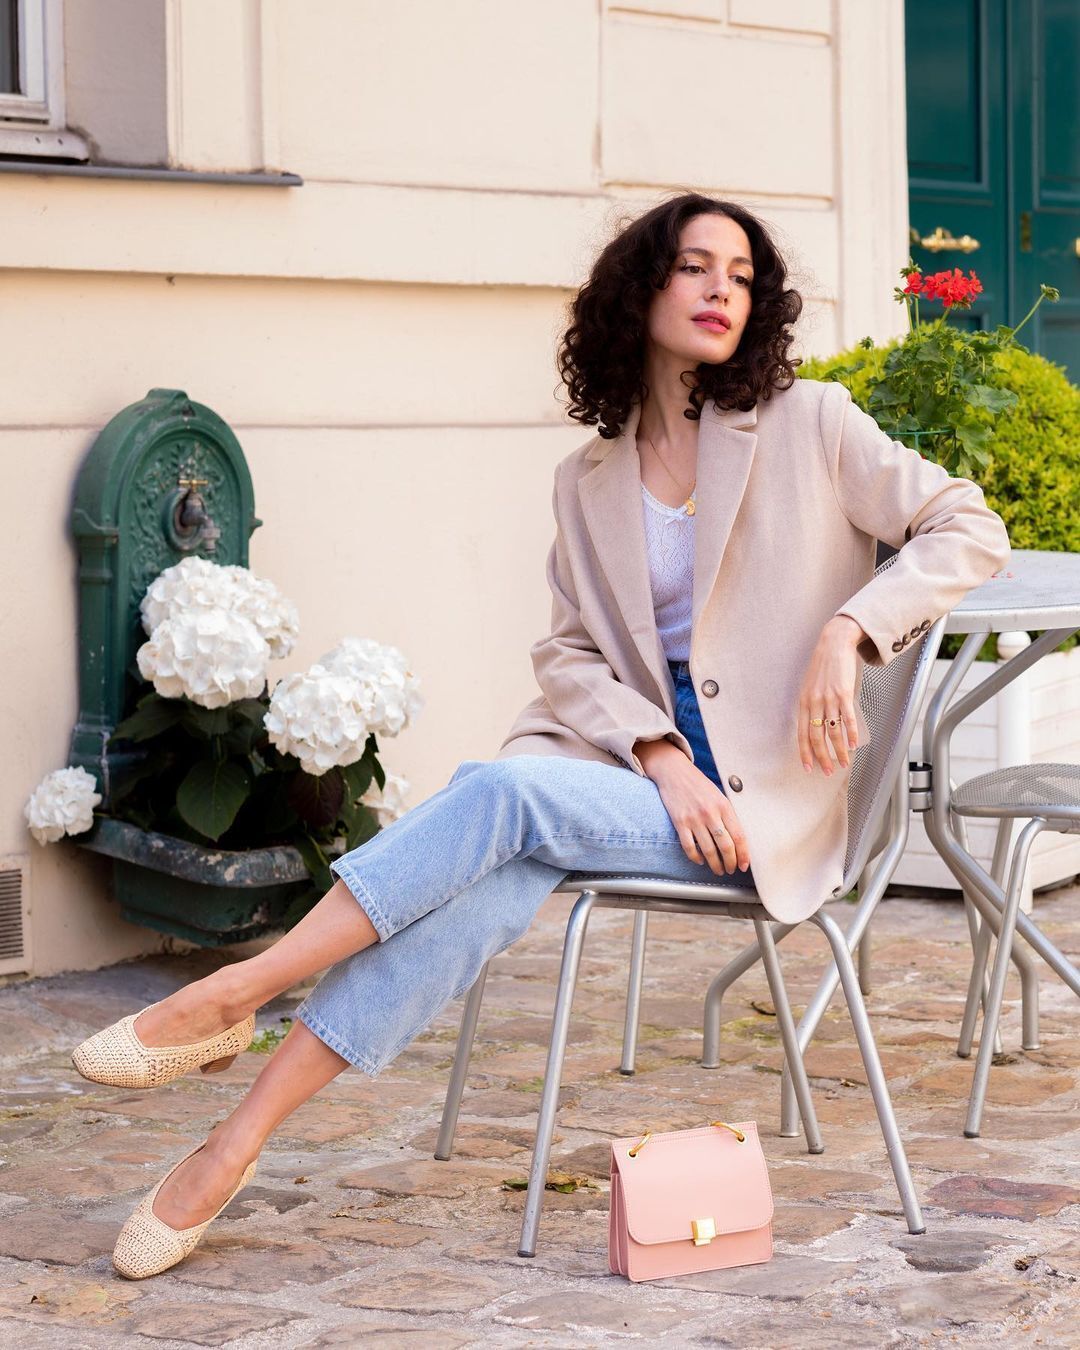 Warm and elegant: 5 interesting ideas on wear a jacket with in early fall